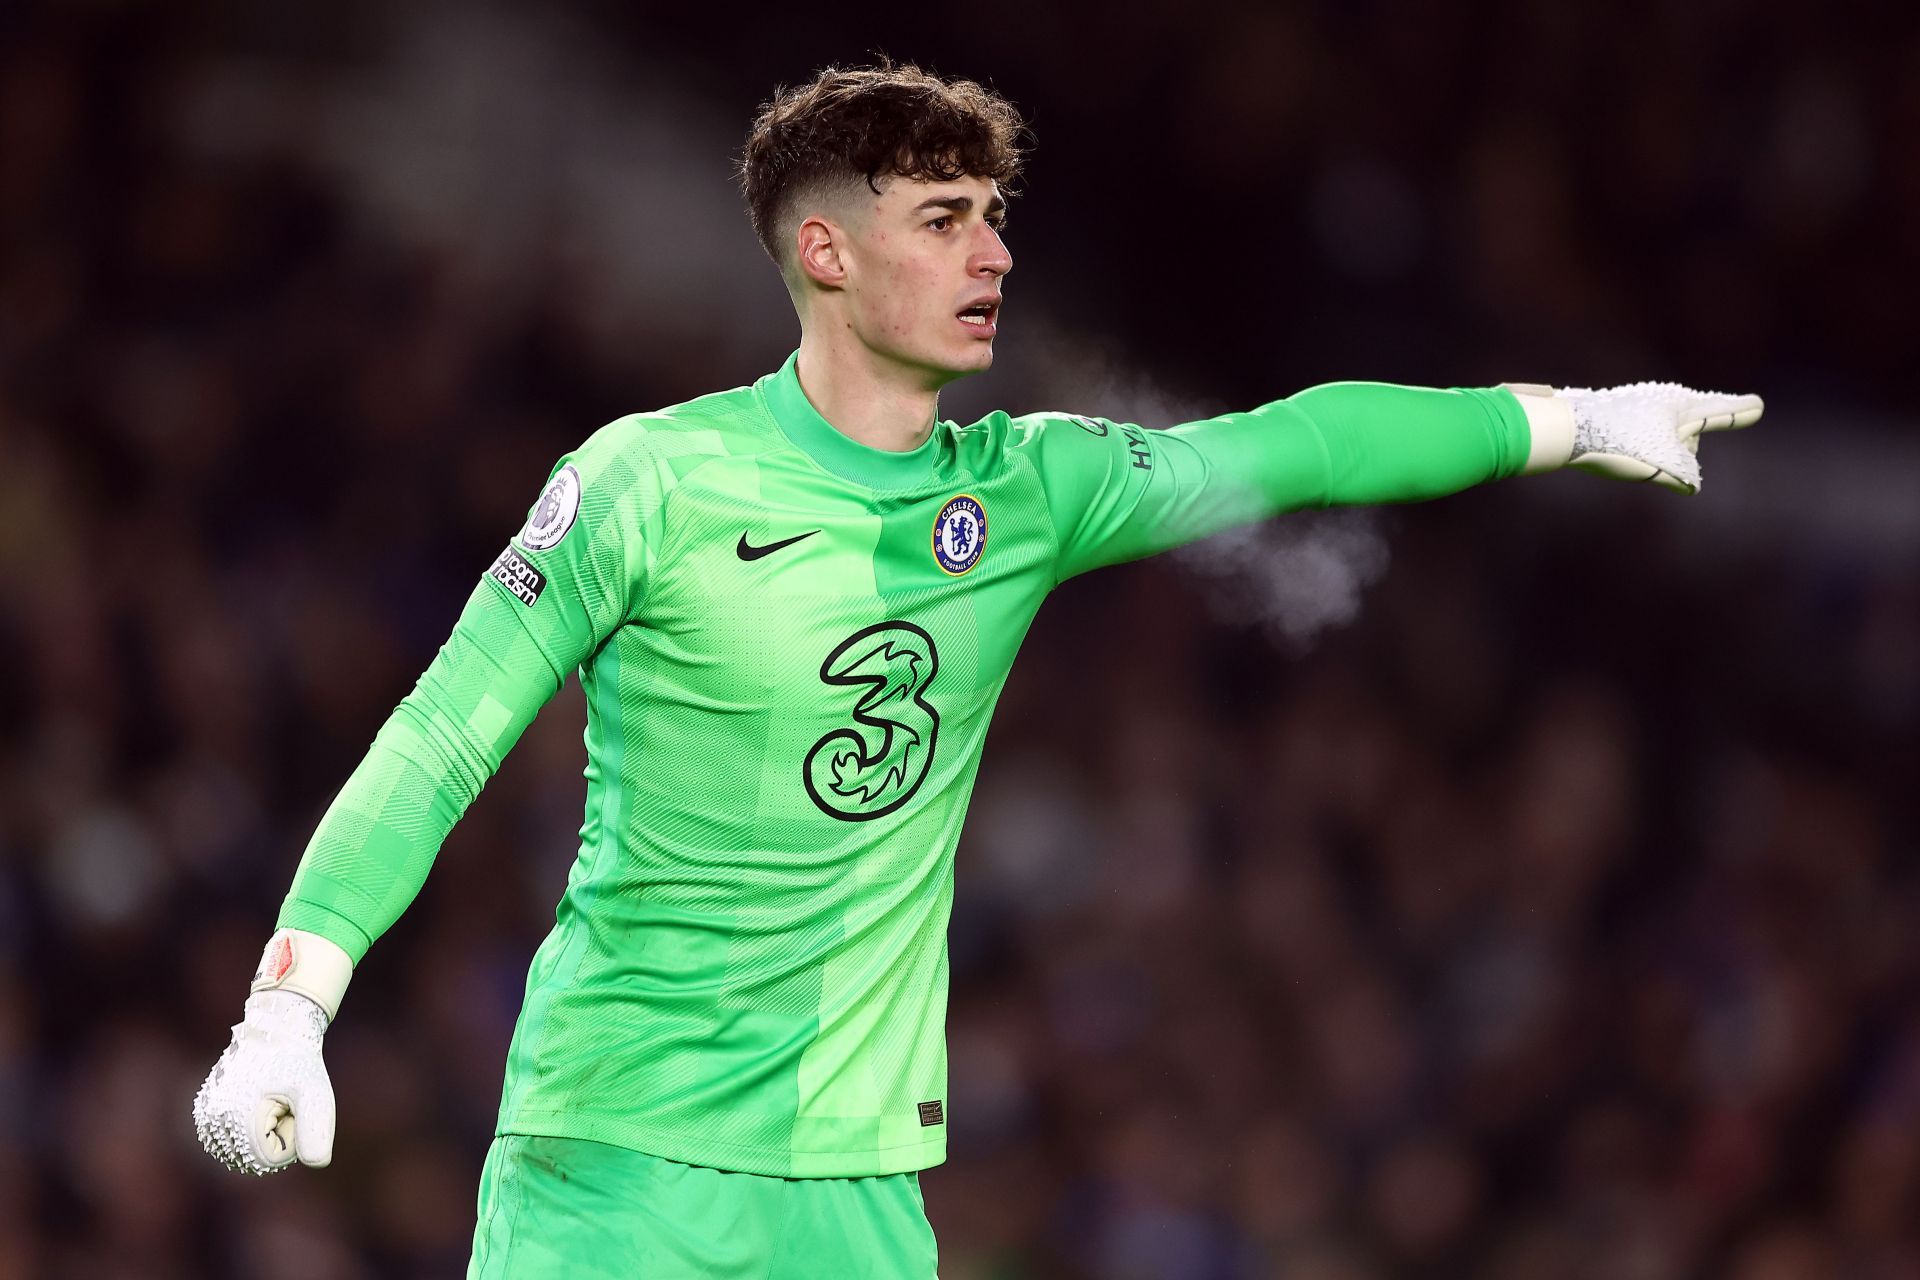 Kepa is yet to play a Premier League game this season